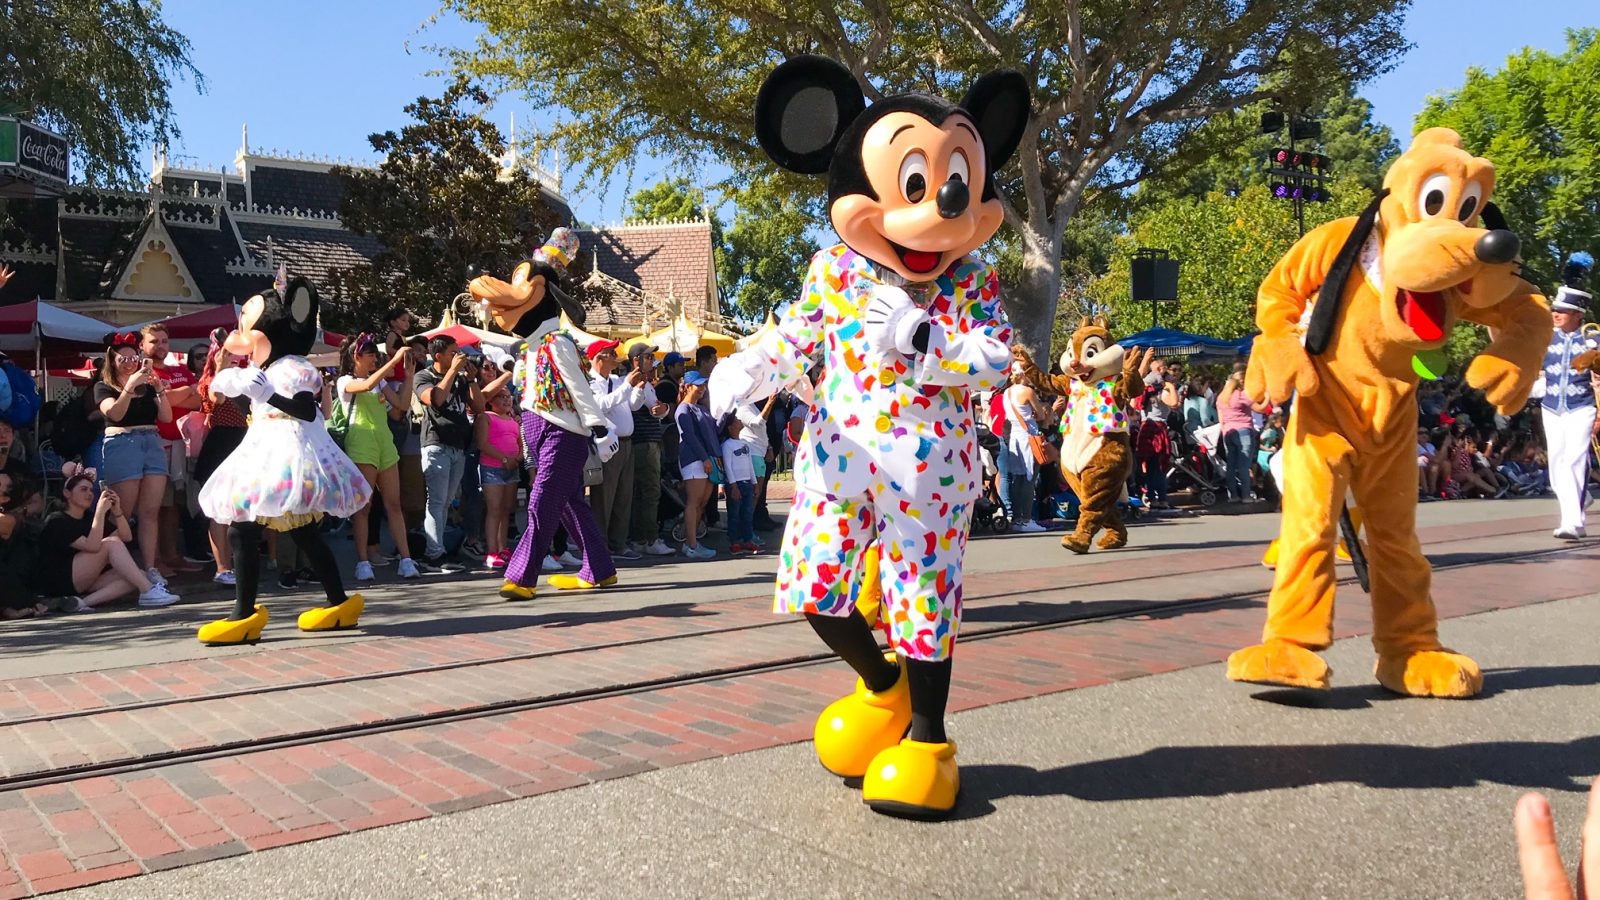 No Disneyland Height Requirements to watch the parade